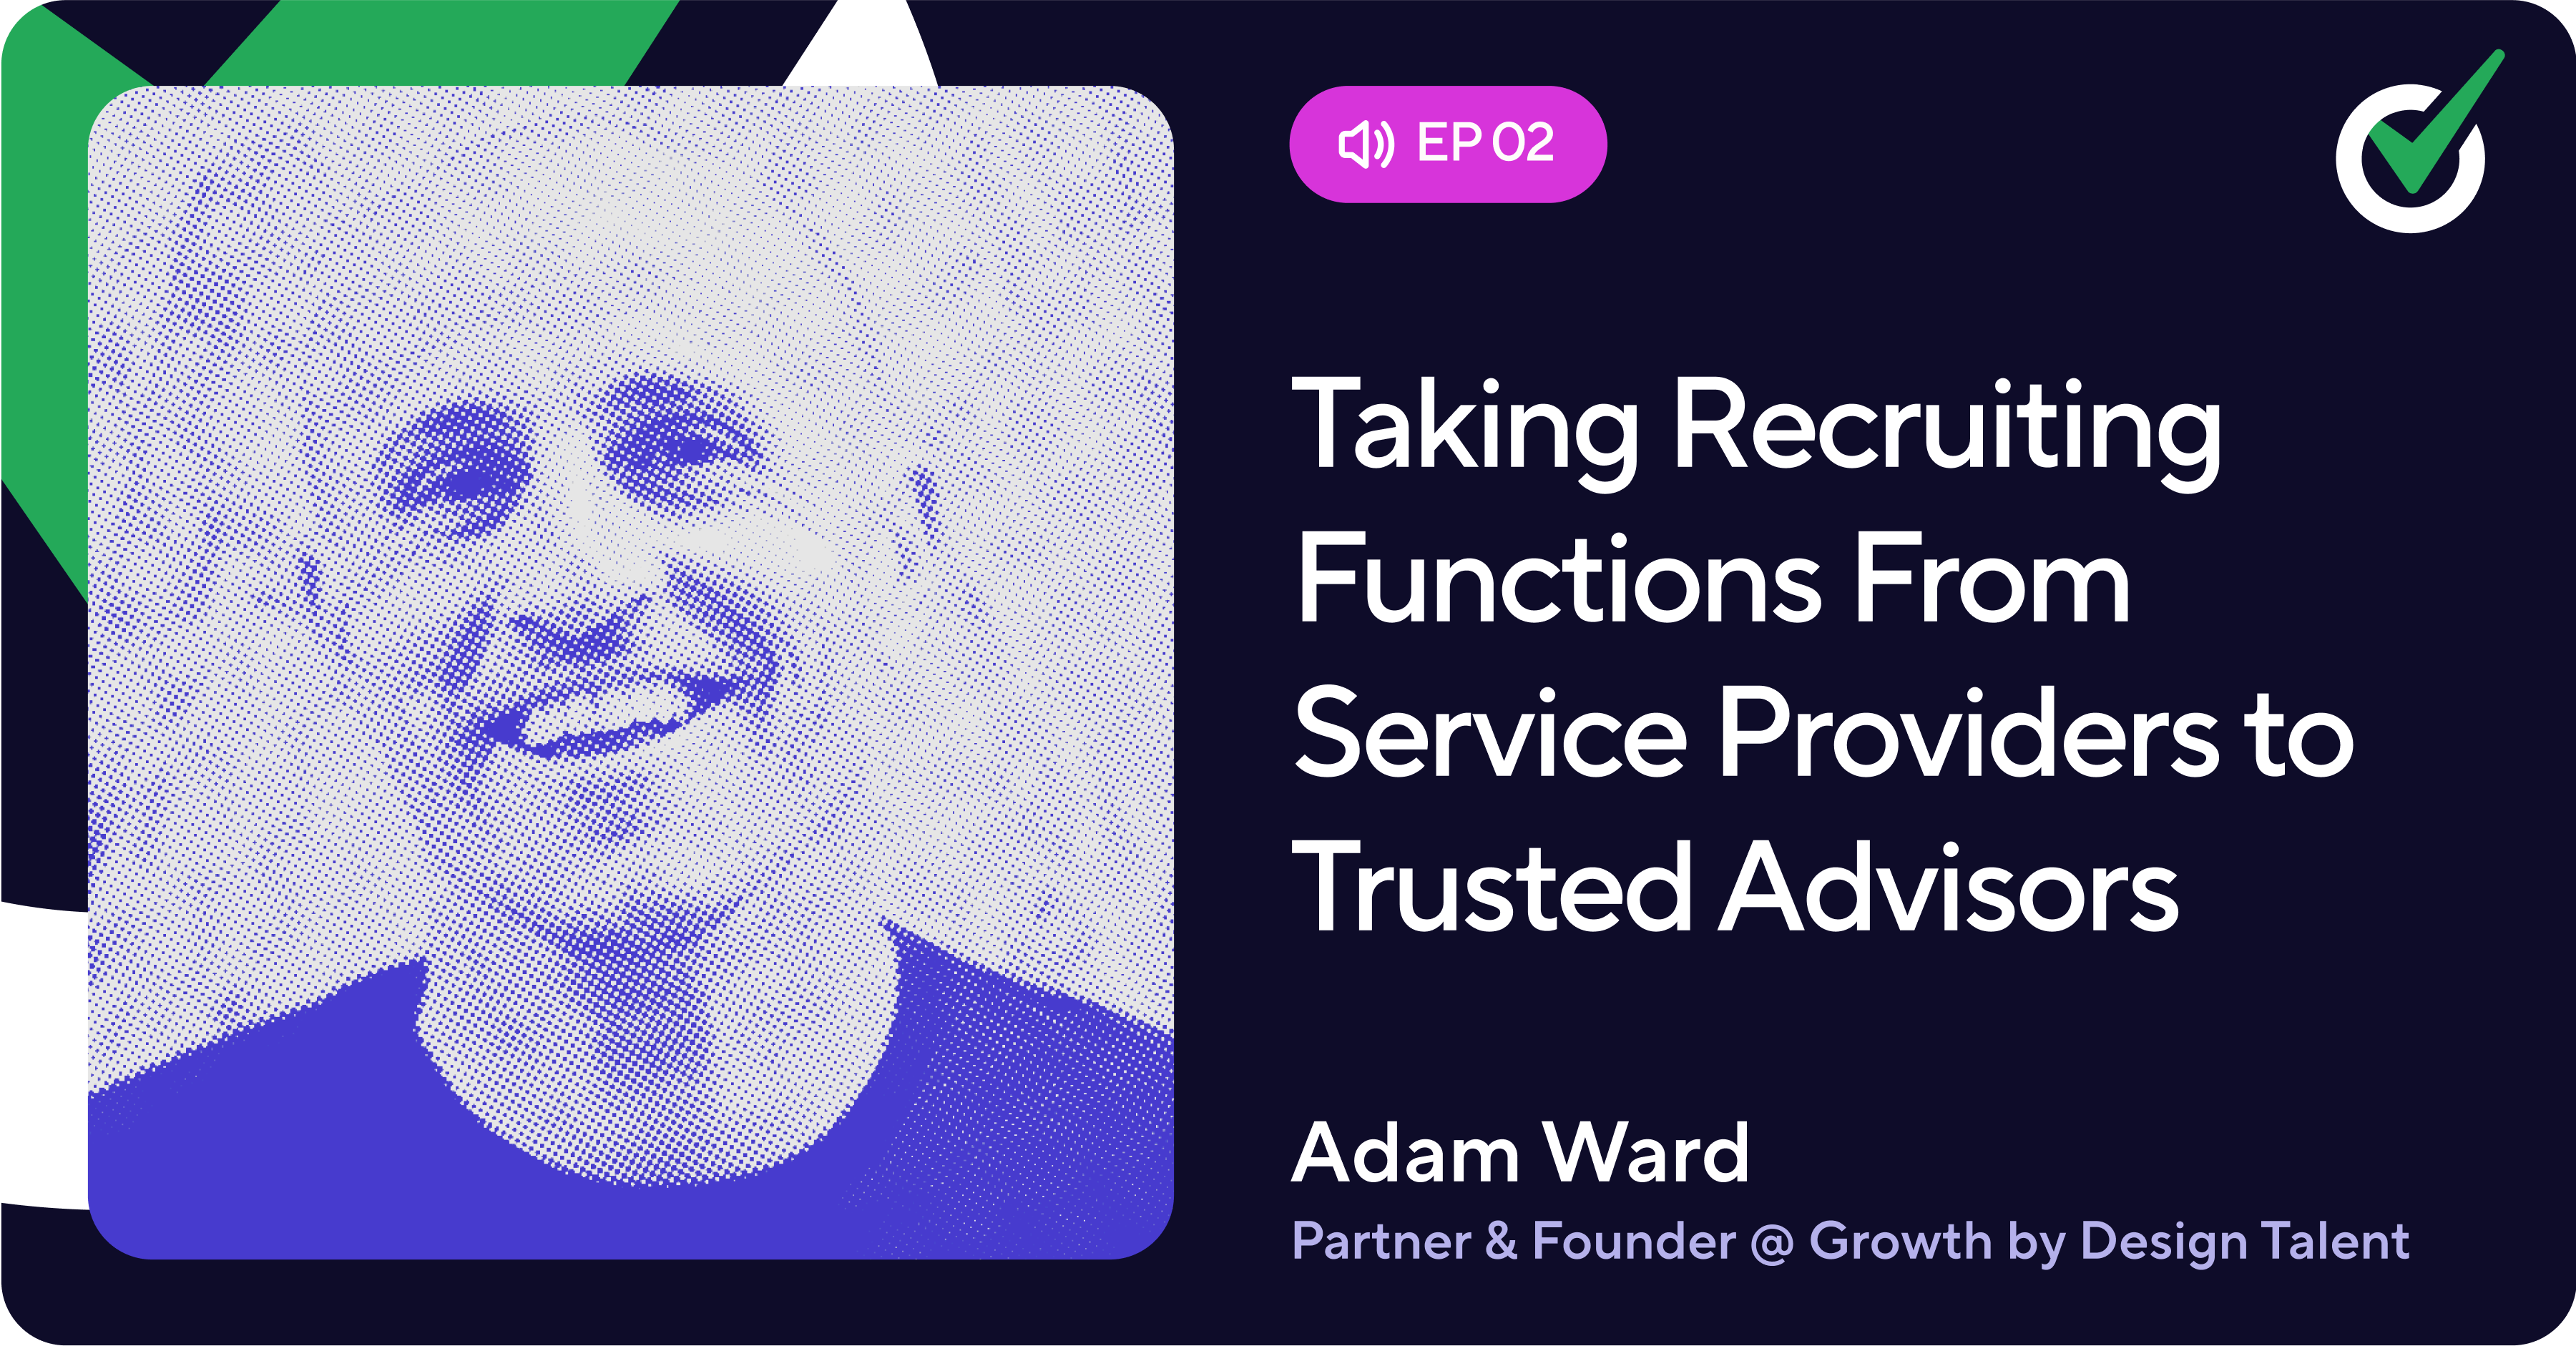 Episode 2 - Taking Recruiting Functions From Service Providers to Trusted Advisors